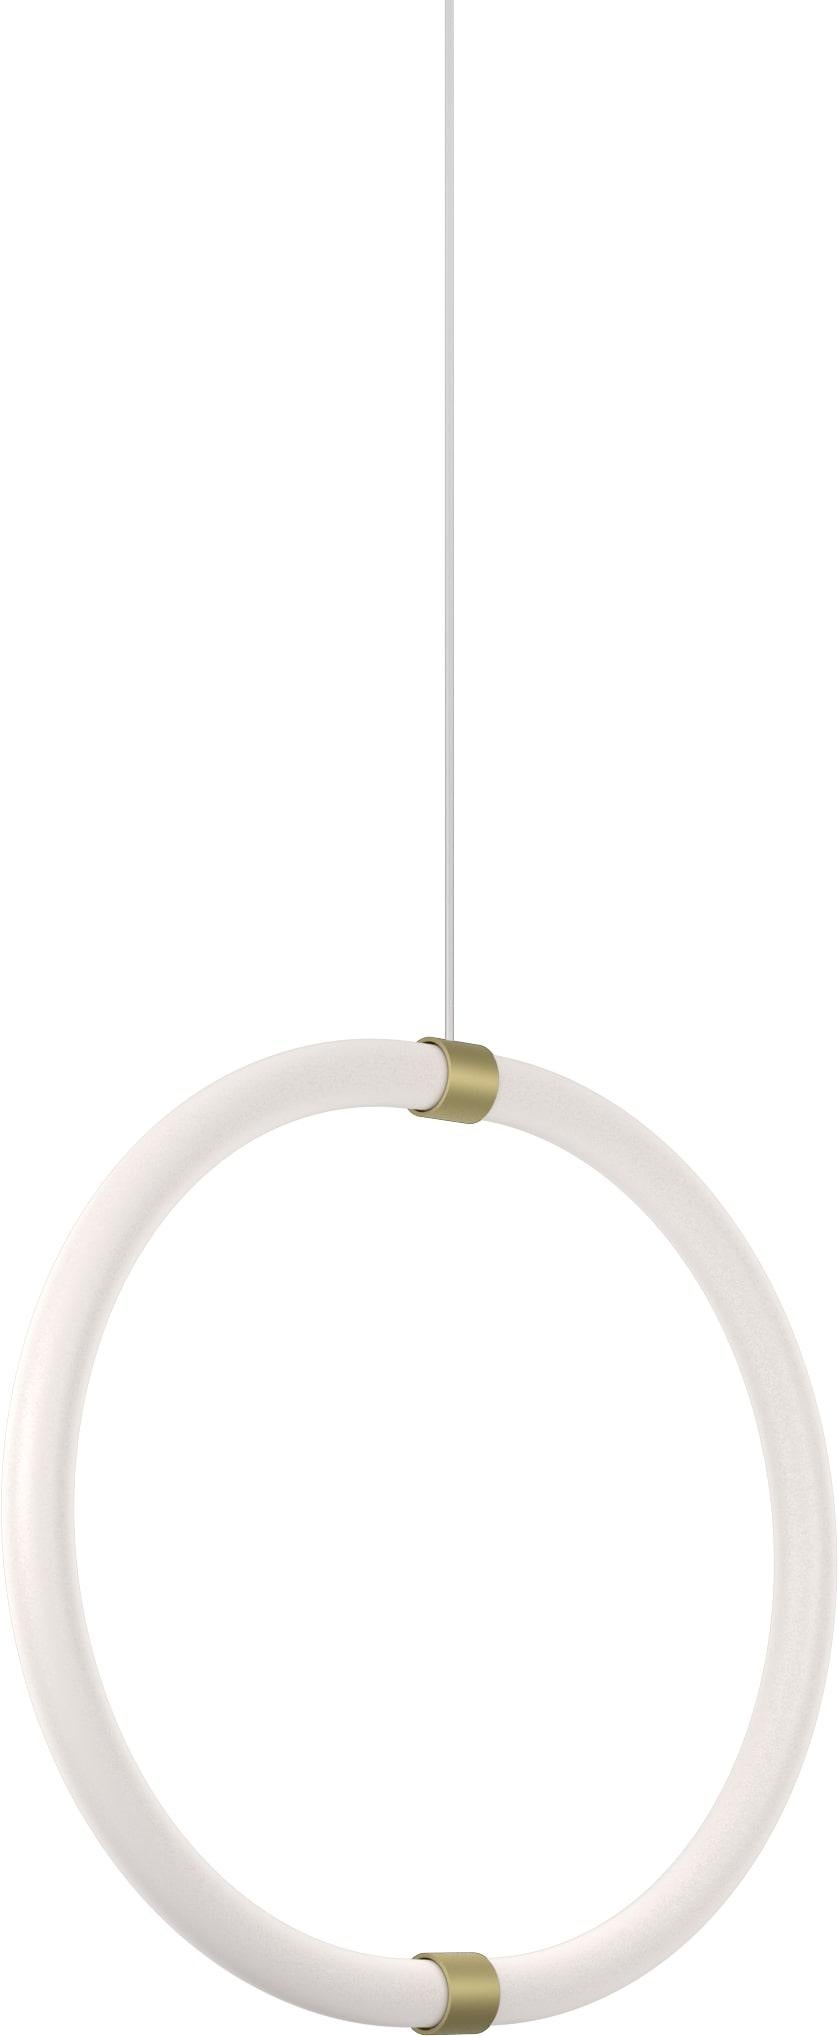 Petite Friture Unseen Pendant Lamp O in Brass Transluscent with Curved LED-lights by Studio Pepe, 2020

Unseen is a set of modular curved LED-light tubes that seemingly float in space. The collection is a sleek lighting ensemble, proof of